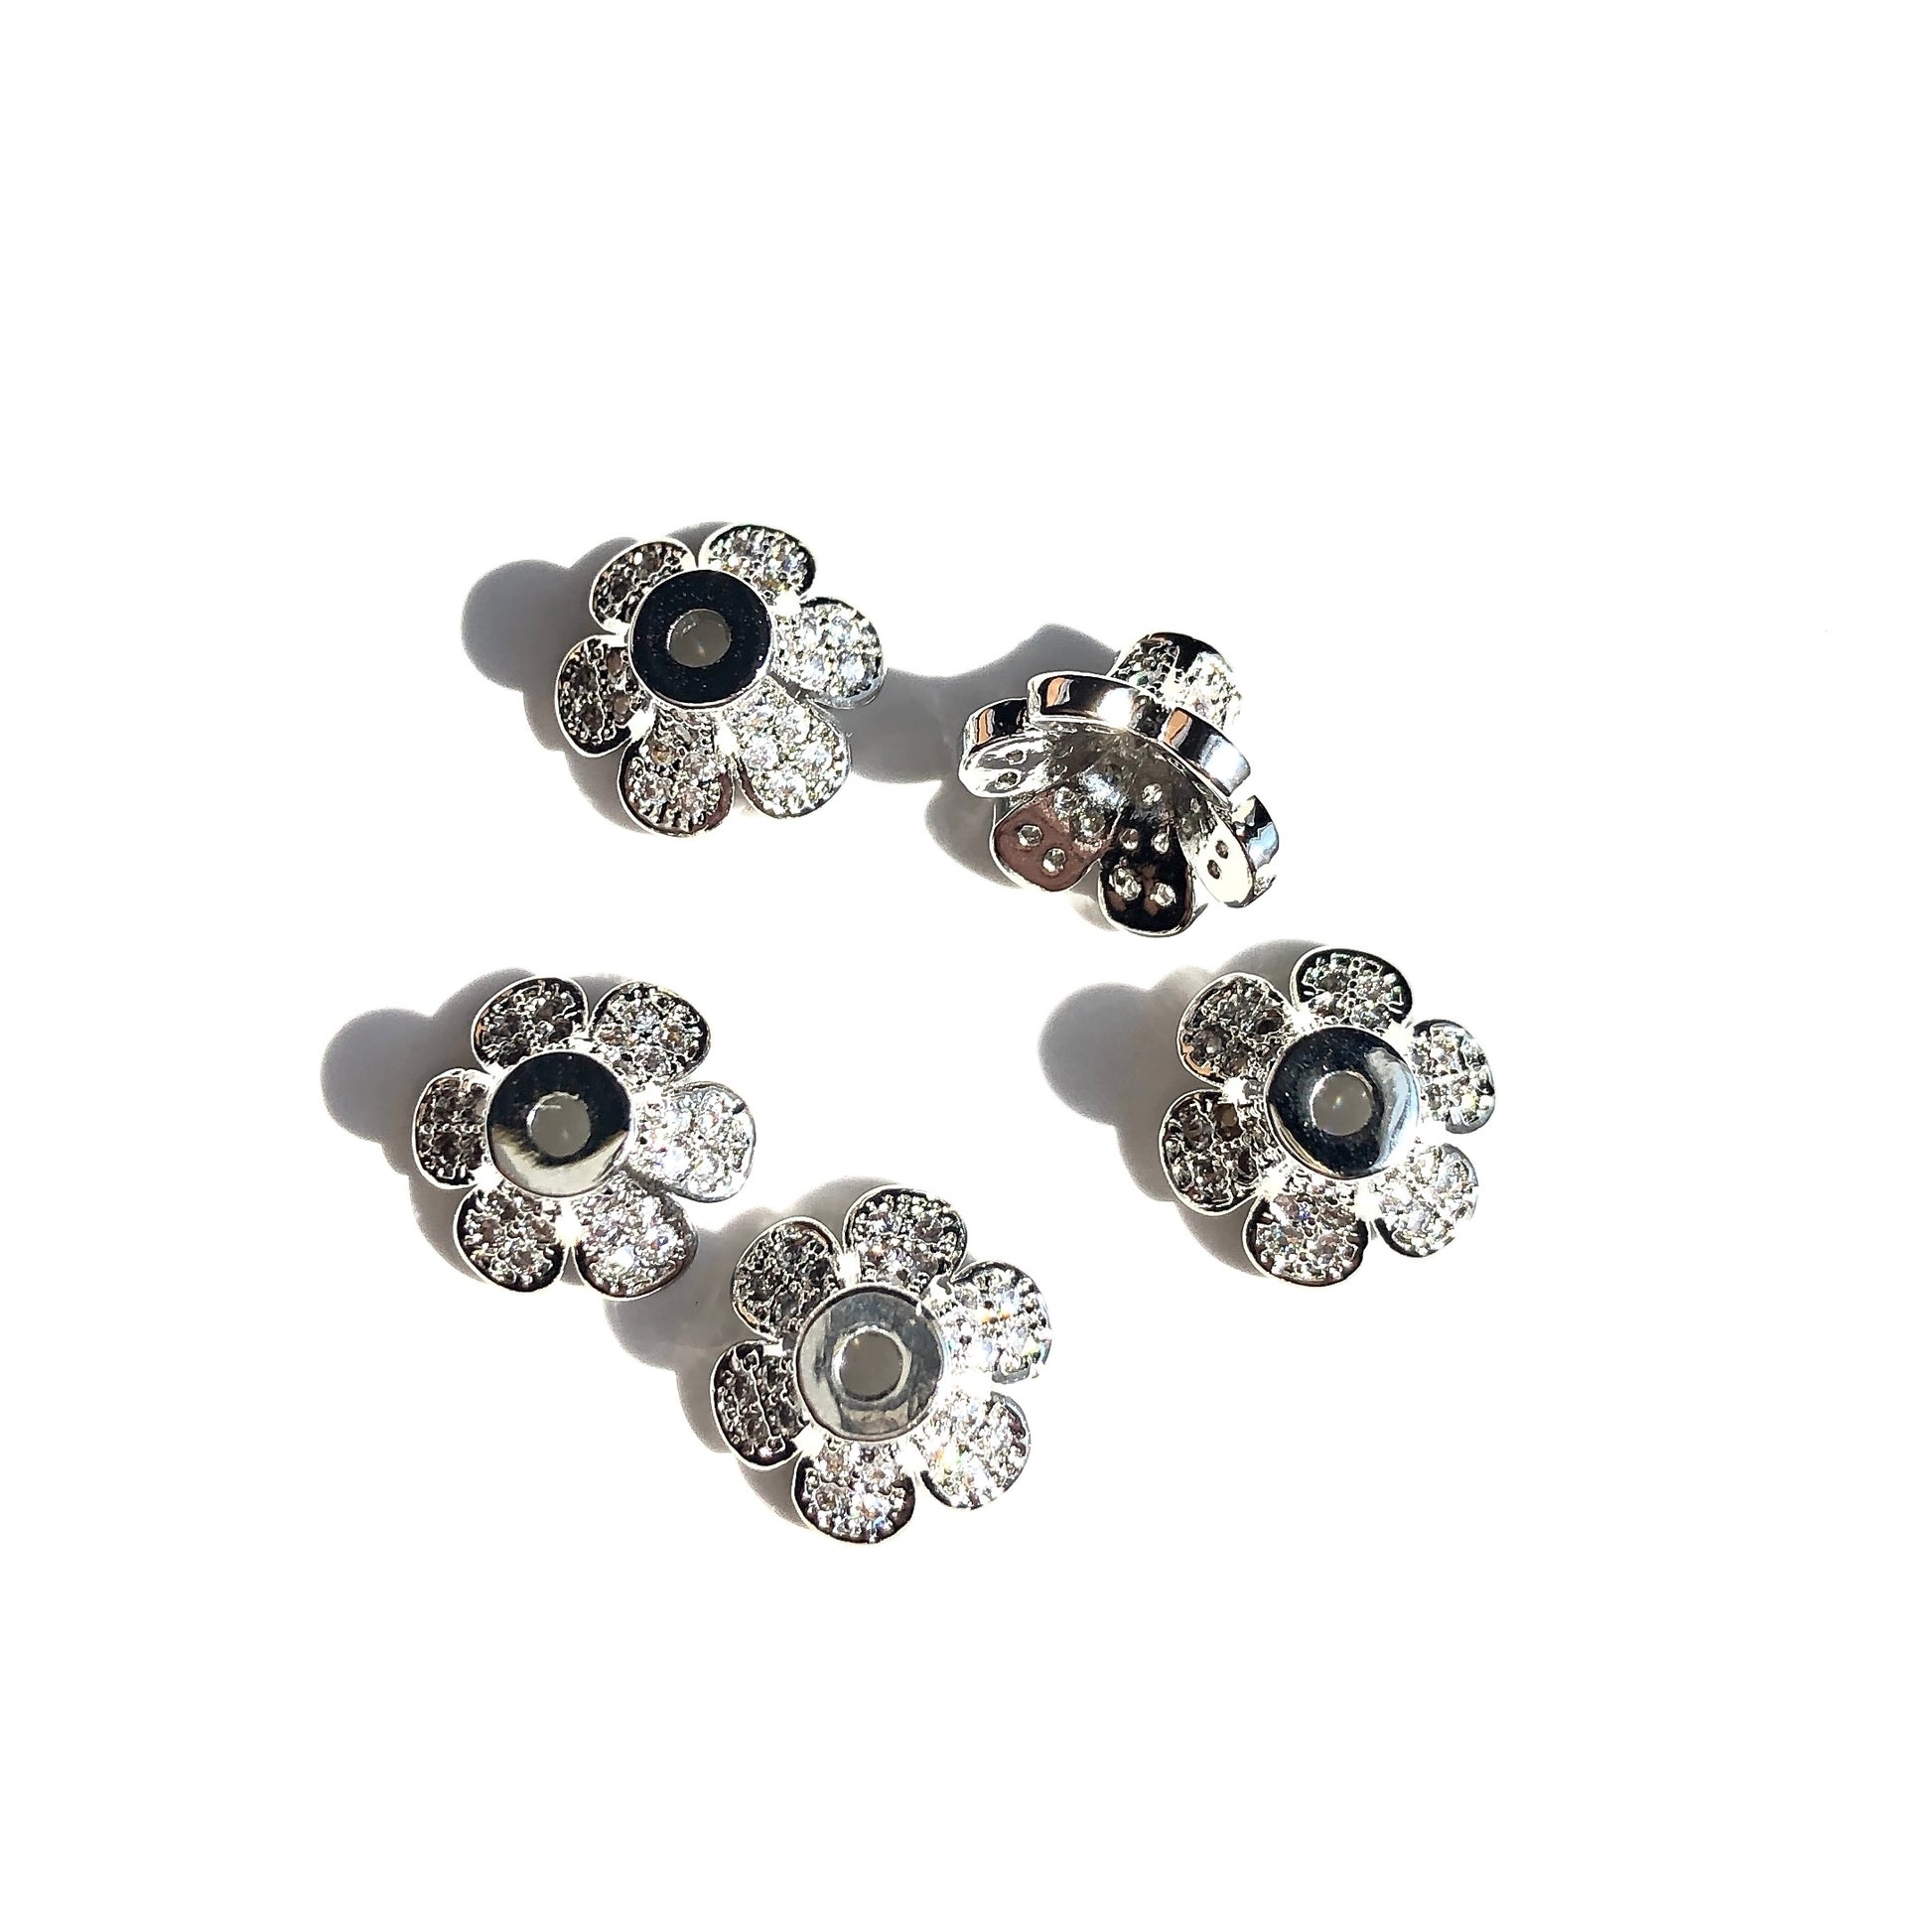 20pcs/lot 10*6mm CZ Paved Beads Caps Flower Spacers Silver CZ Paved Spacers Beads Caps New Spacers Arrivals Charms Beads Beyond